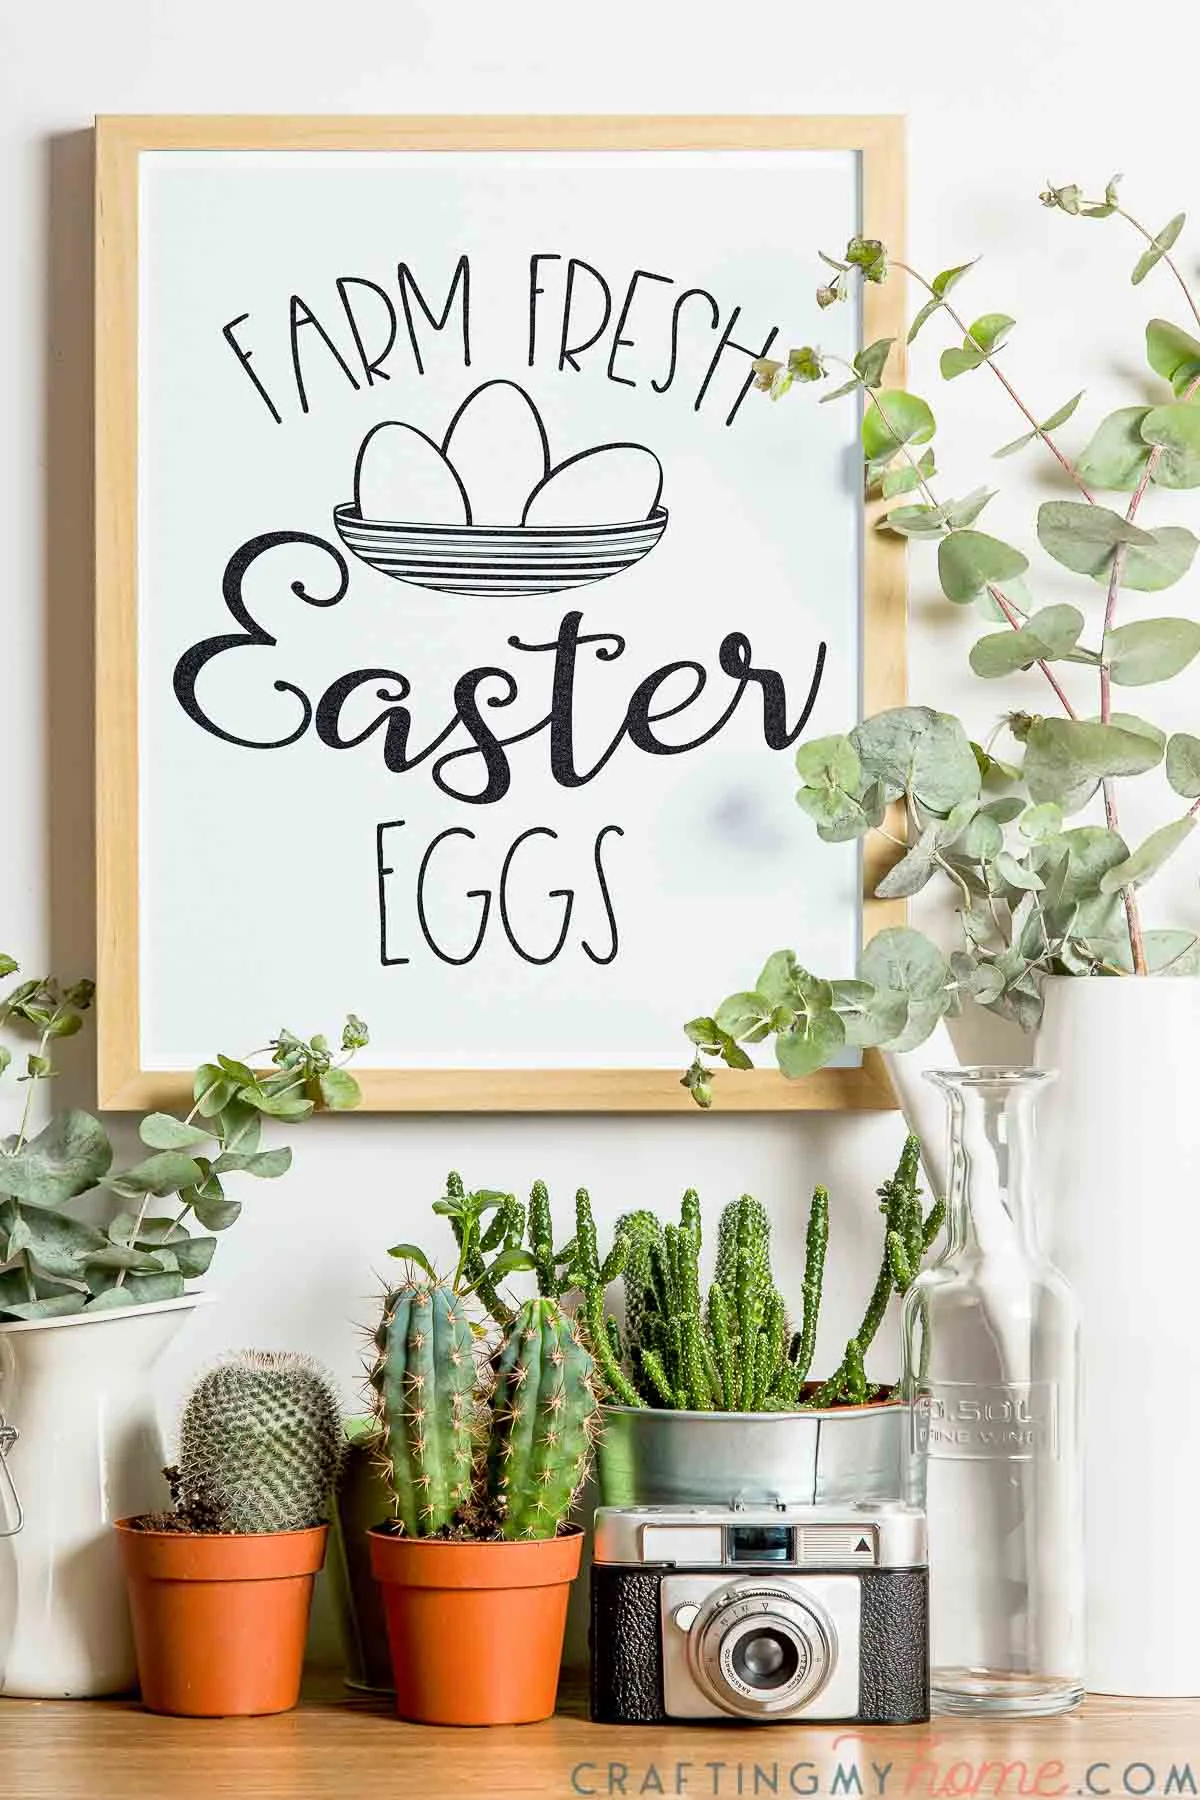 Console with plants on it and frame hanging on the wall above it with the beautiful Easter egg sign in it.